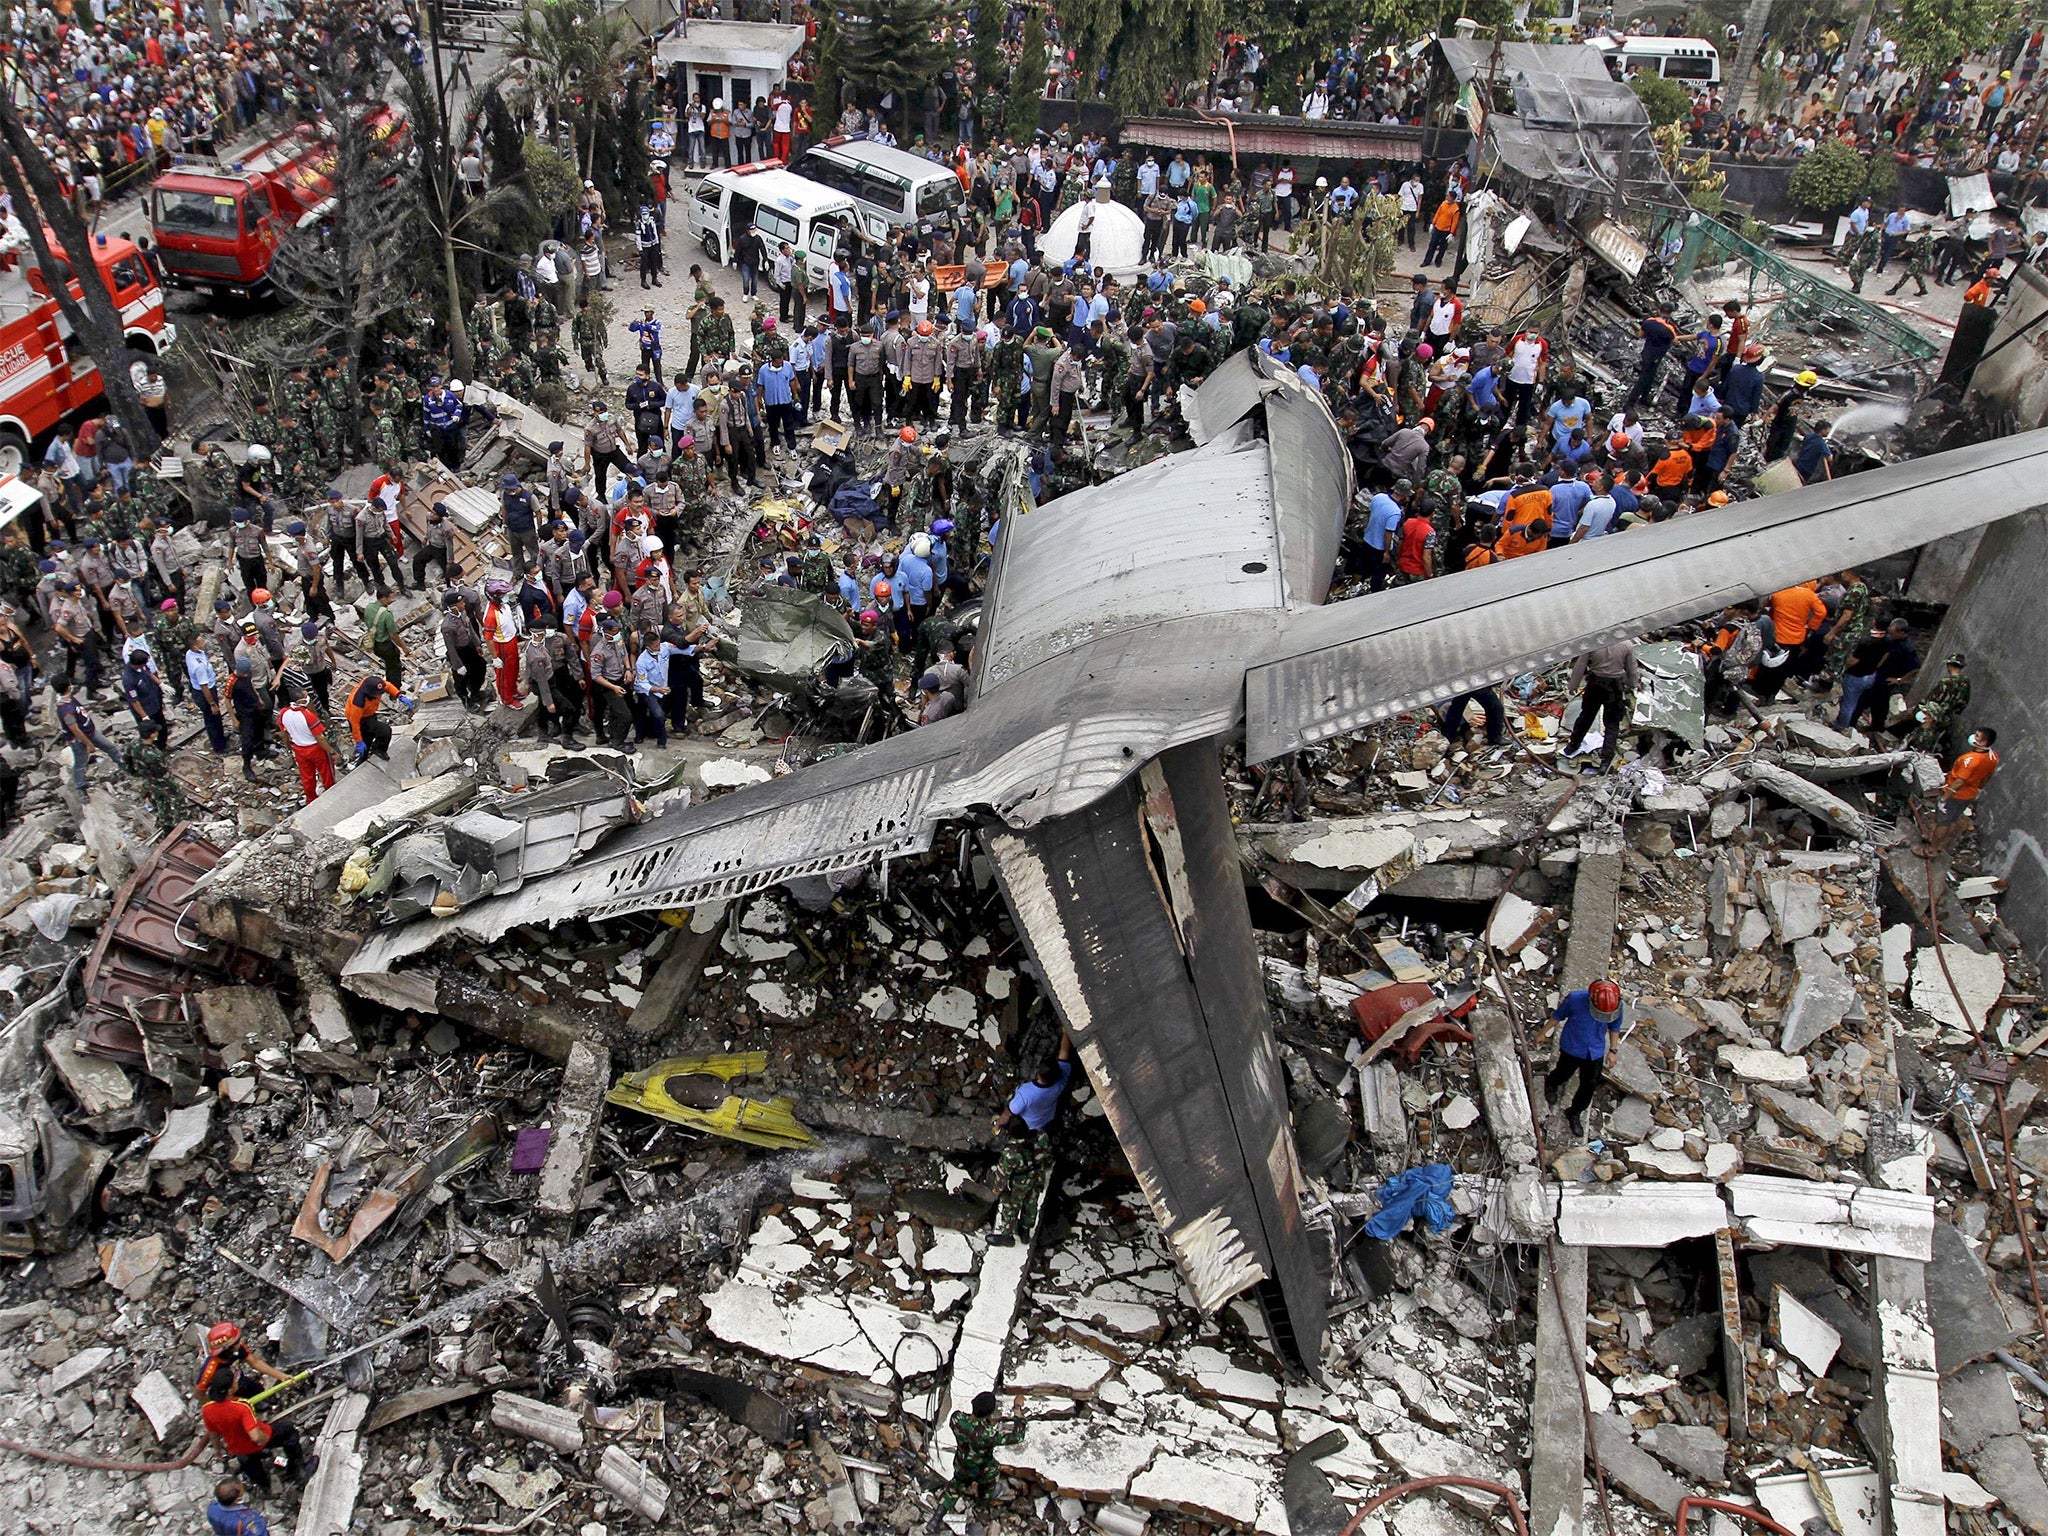 Security forces and rescue teams examine the wreckage of the military plane